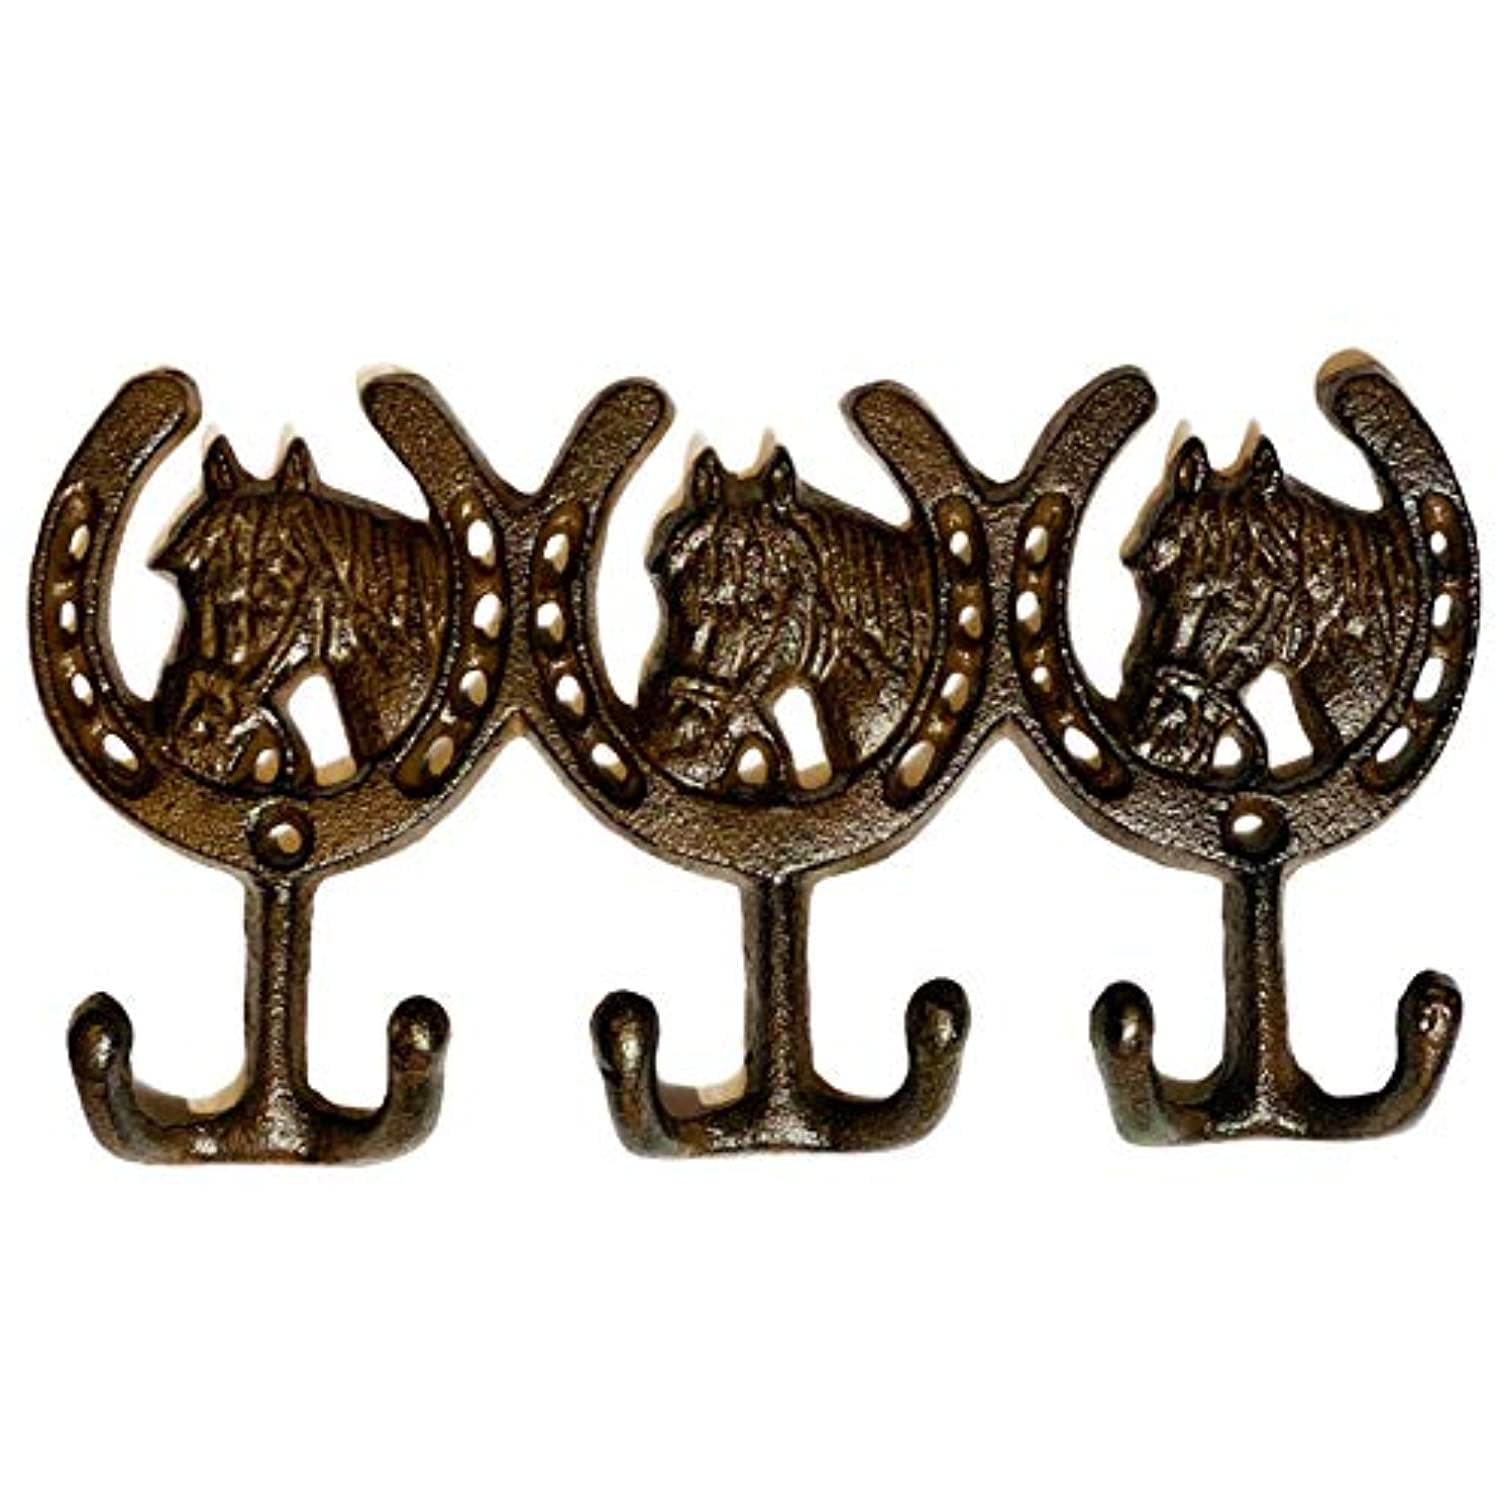 Horse Hat Boot Western Cast Iron Coat Hooks Wall Rustic Antique Vintage Style 